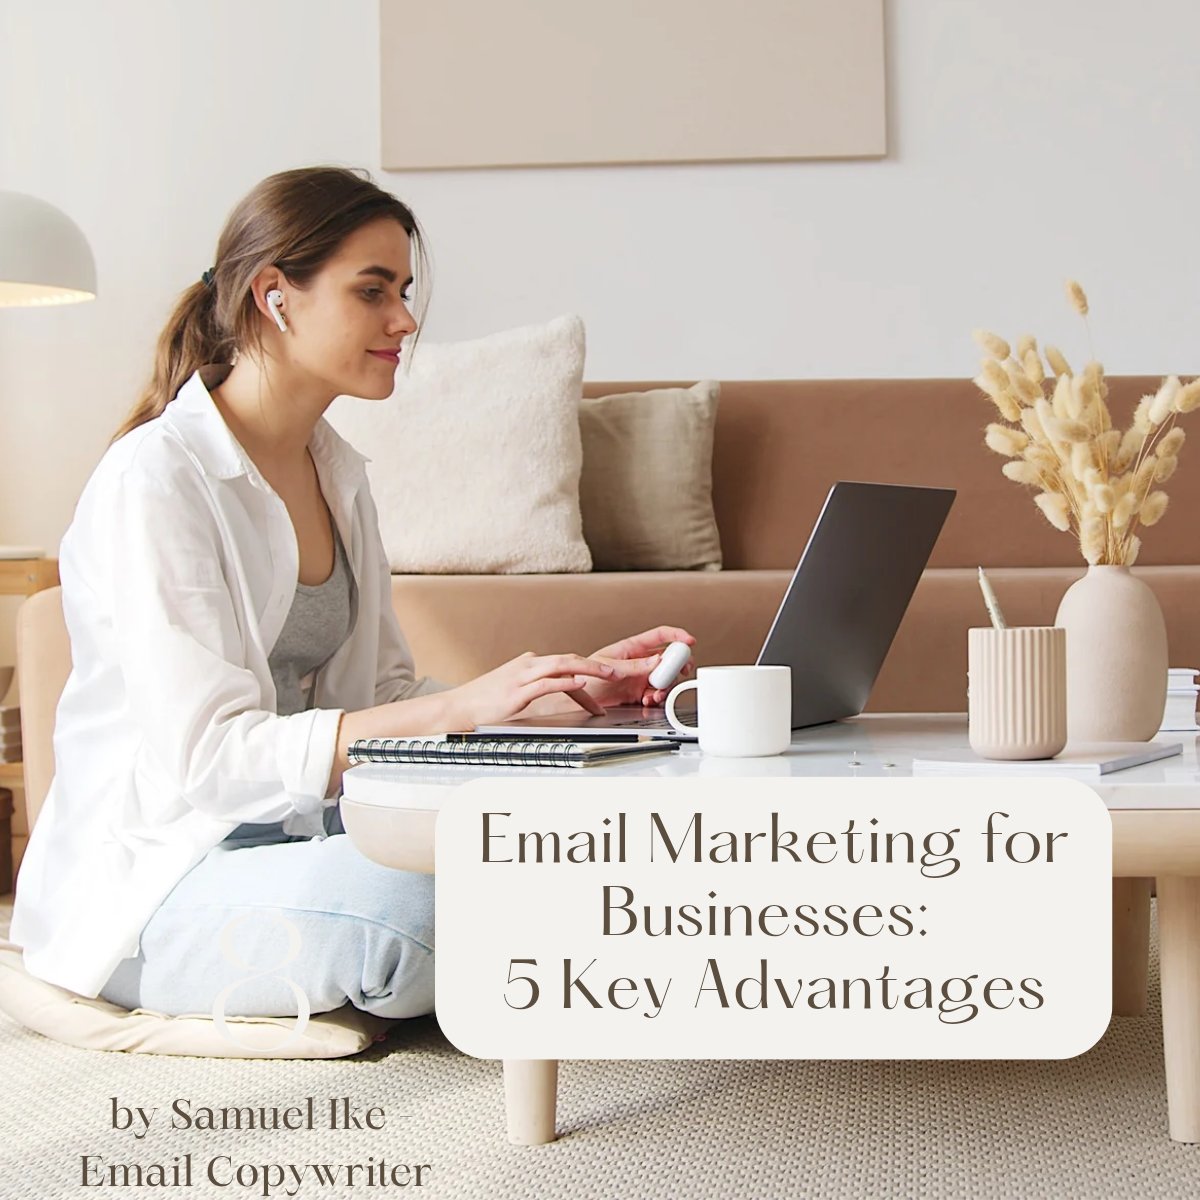 In this post, we'll explore the five key advantages of email marketing for businesses:

linkedin.com/posts/freelanc…

#emailmarketing #emailcopywriter #businessmarketing #businesssuccess #saas #emailcopywriterforhire #ecommerce #b2b #emailtips